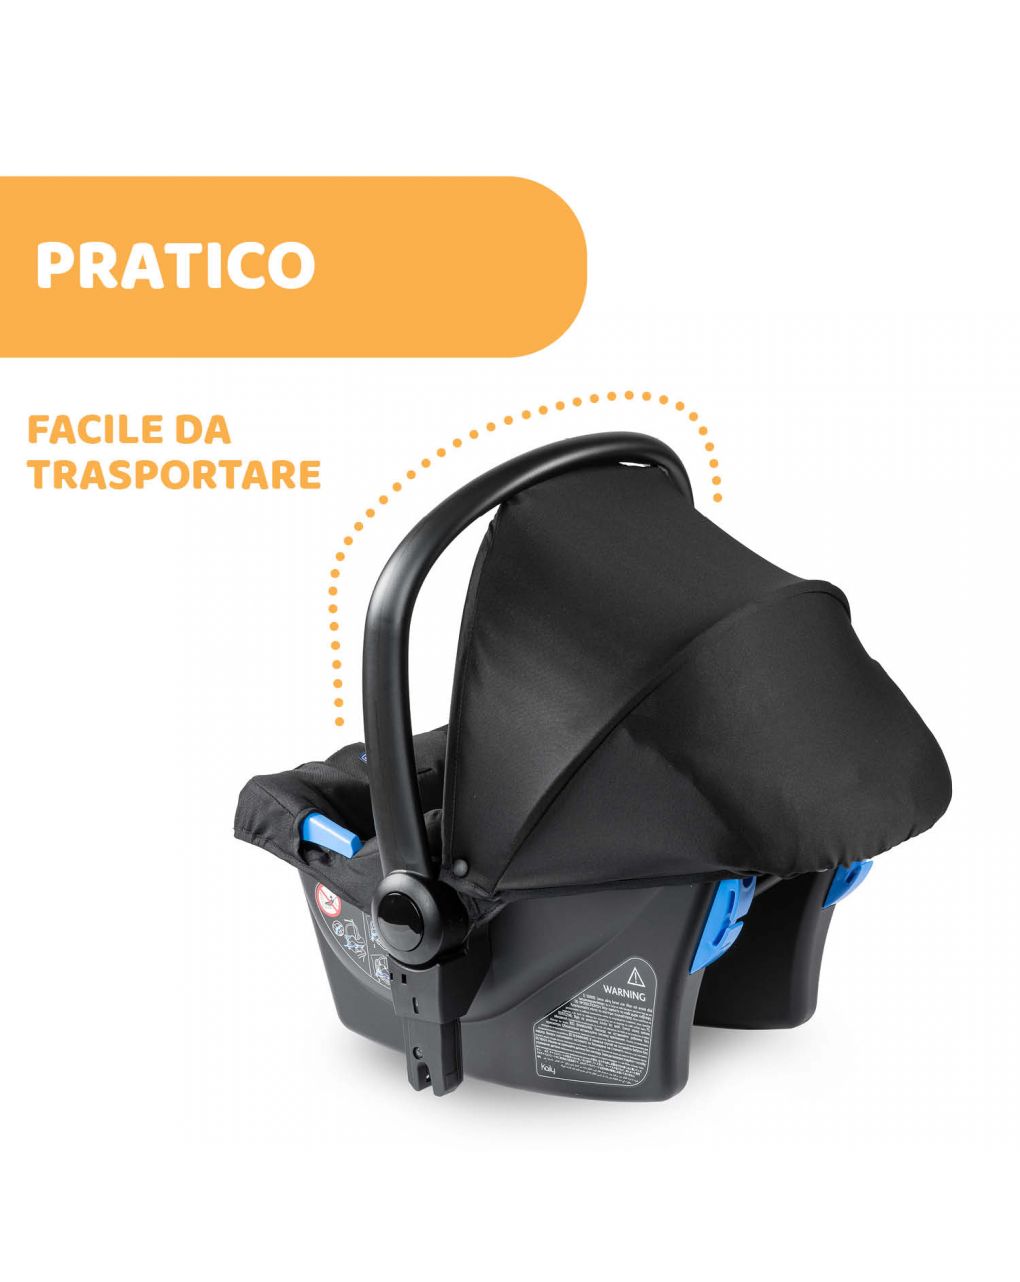 Chicco - base portabebés kaily - Chicco